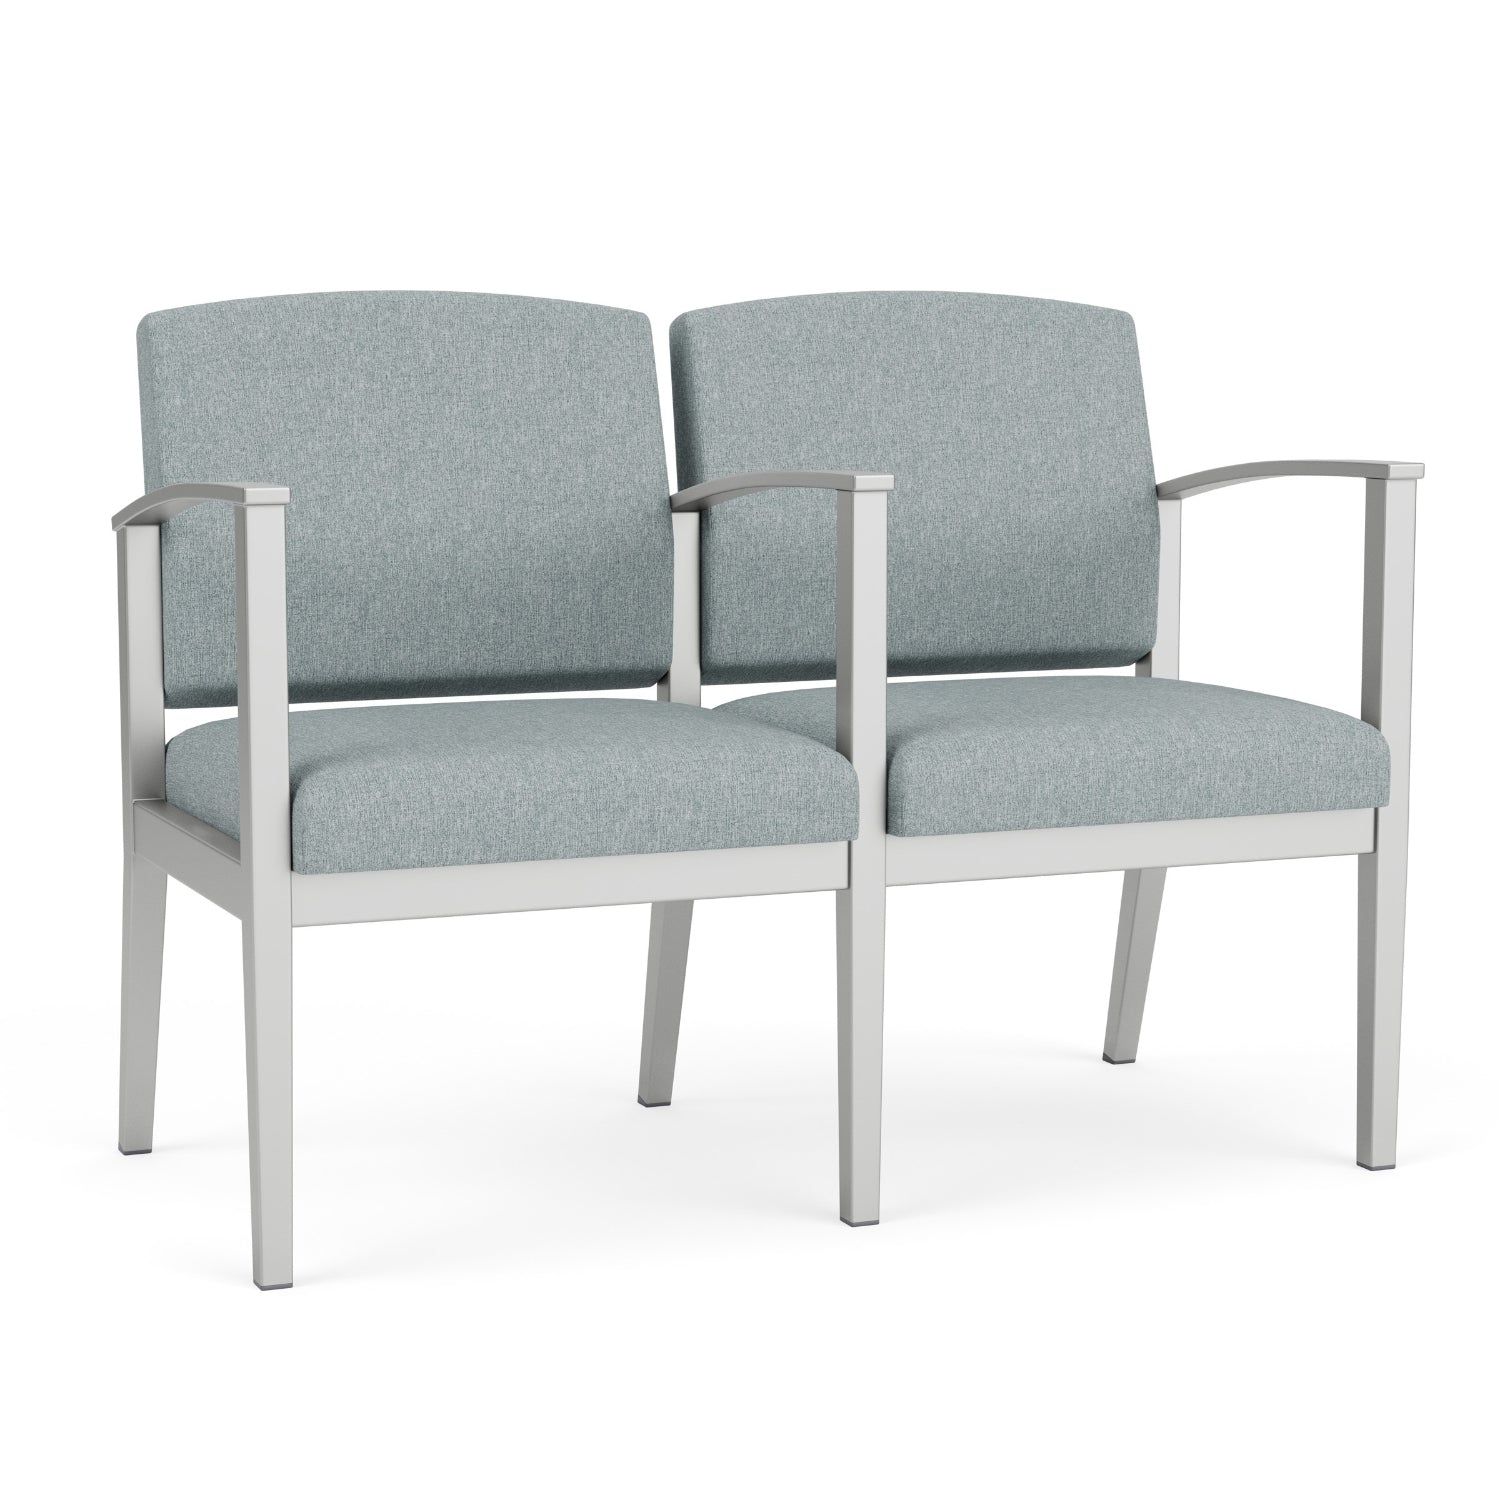 Amherst Steel Collection Reception Seating, 2 Seats with Center Arm, Healthcare Vinyl Upholstery, FREE SHIPPING